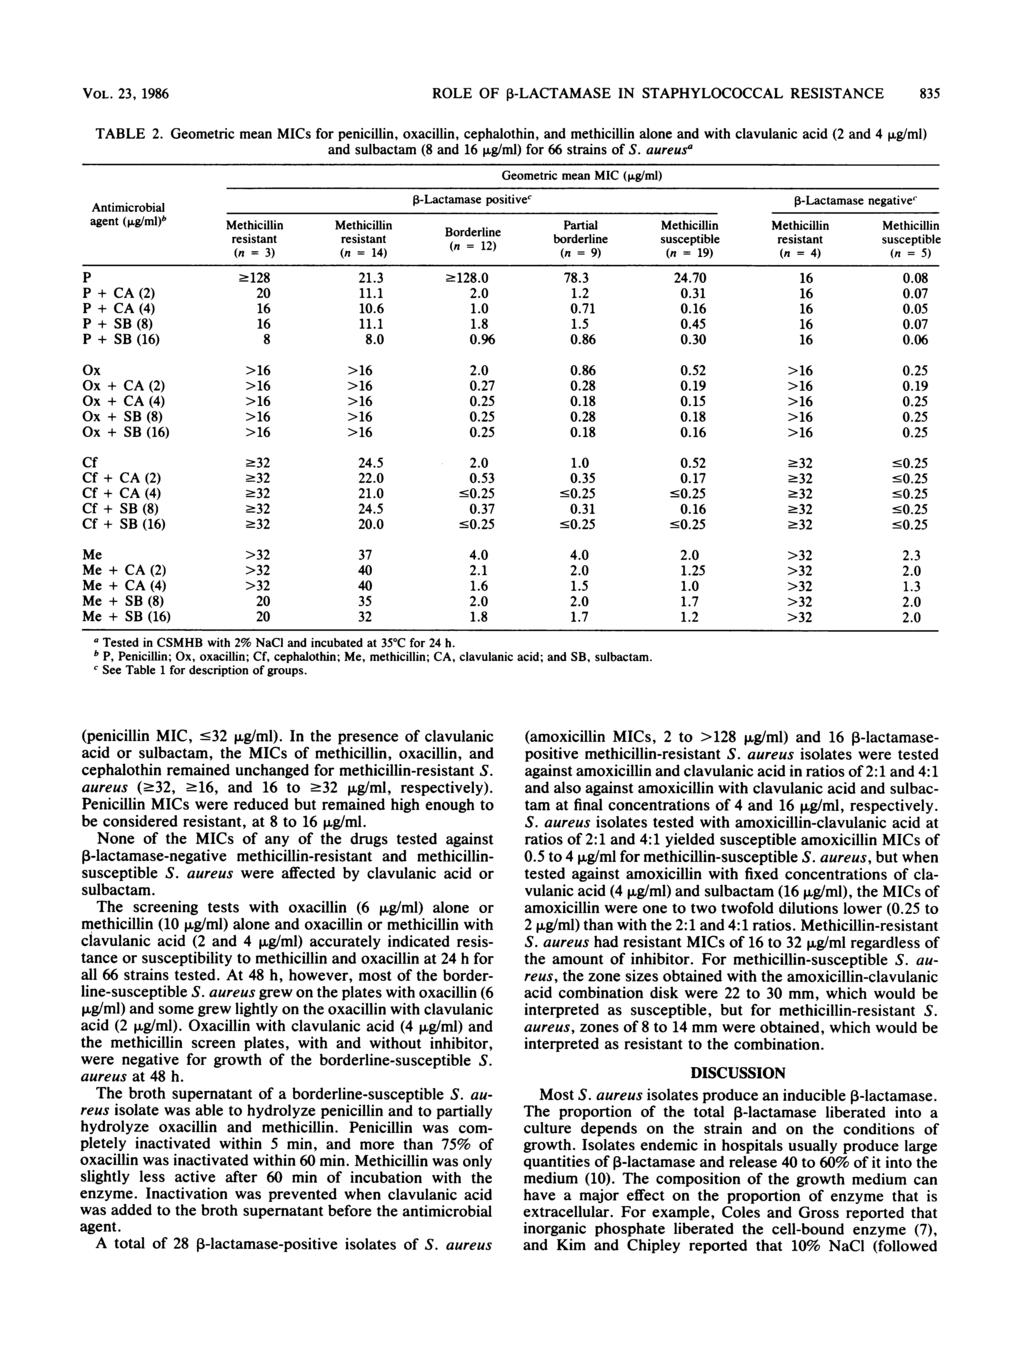 ROLE OF P-LACTAMASE IN STAPHYLOCOCCAL RESISTANCE VOL. 23, 1986 835 TABLE 2.